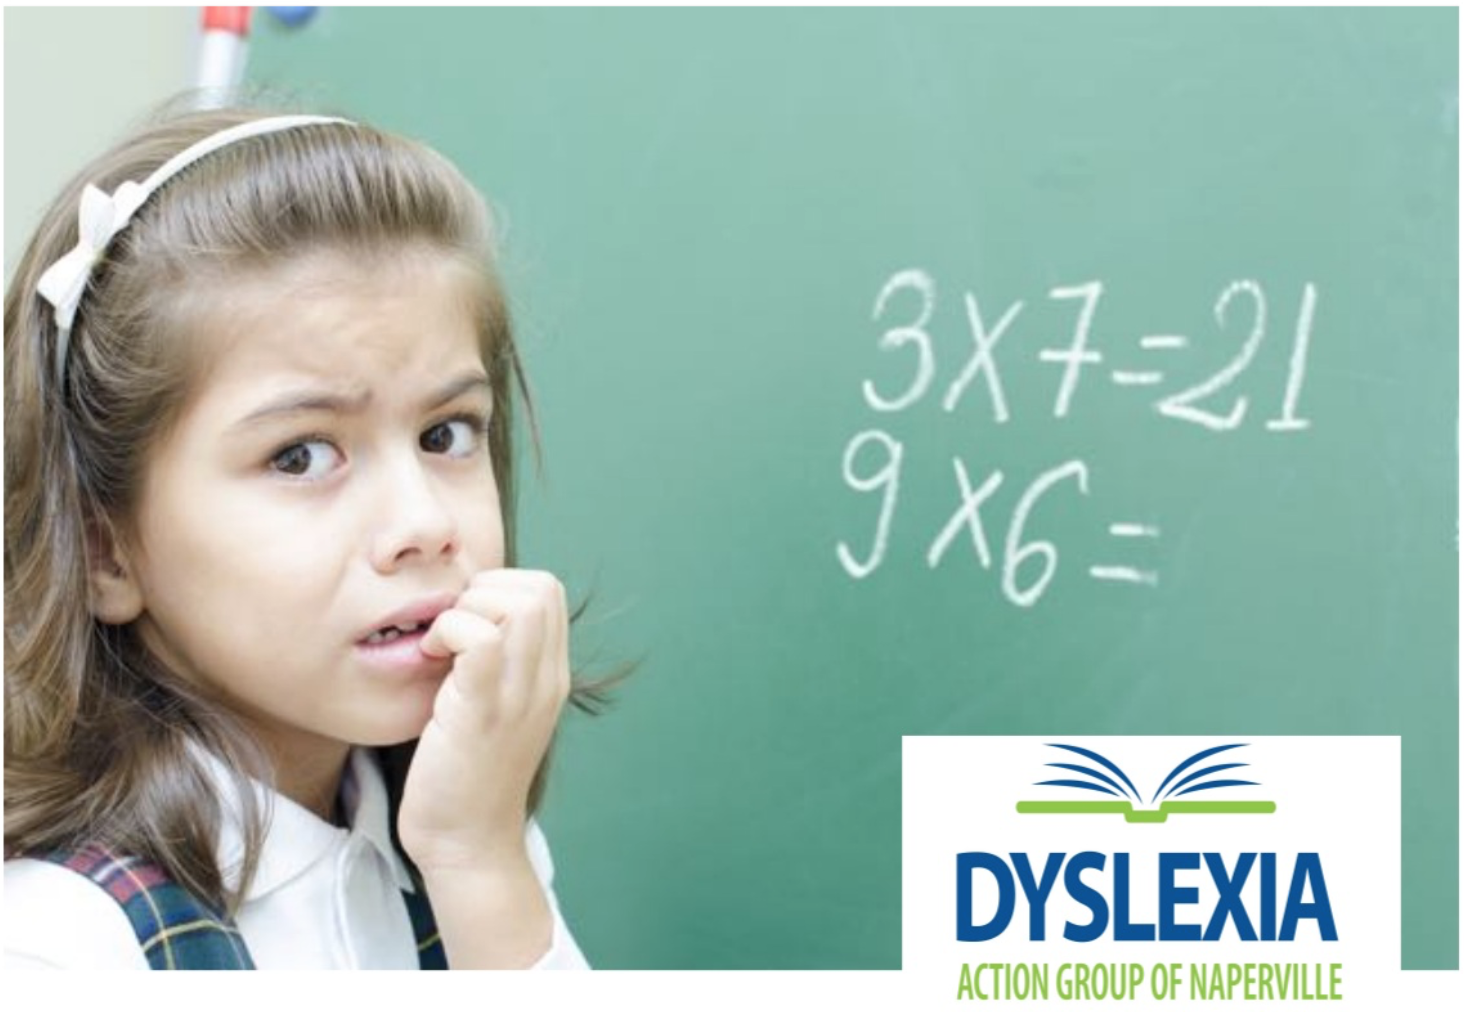 dyslexia-action-group-of-naperville-event-dyscalculia-camille-jones